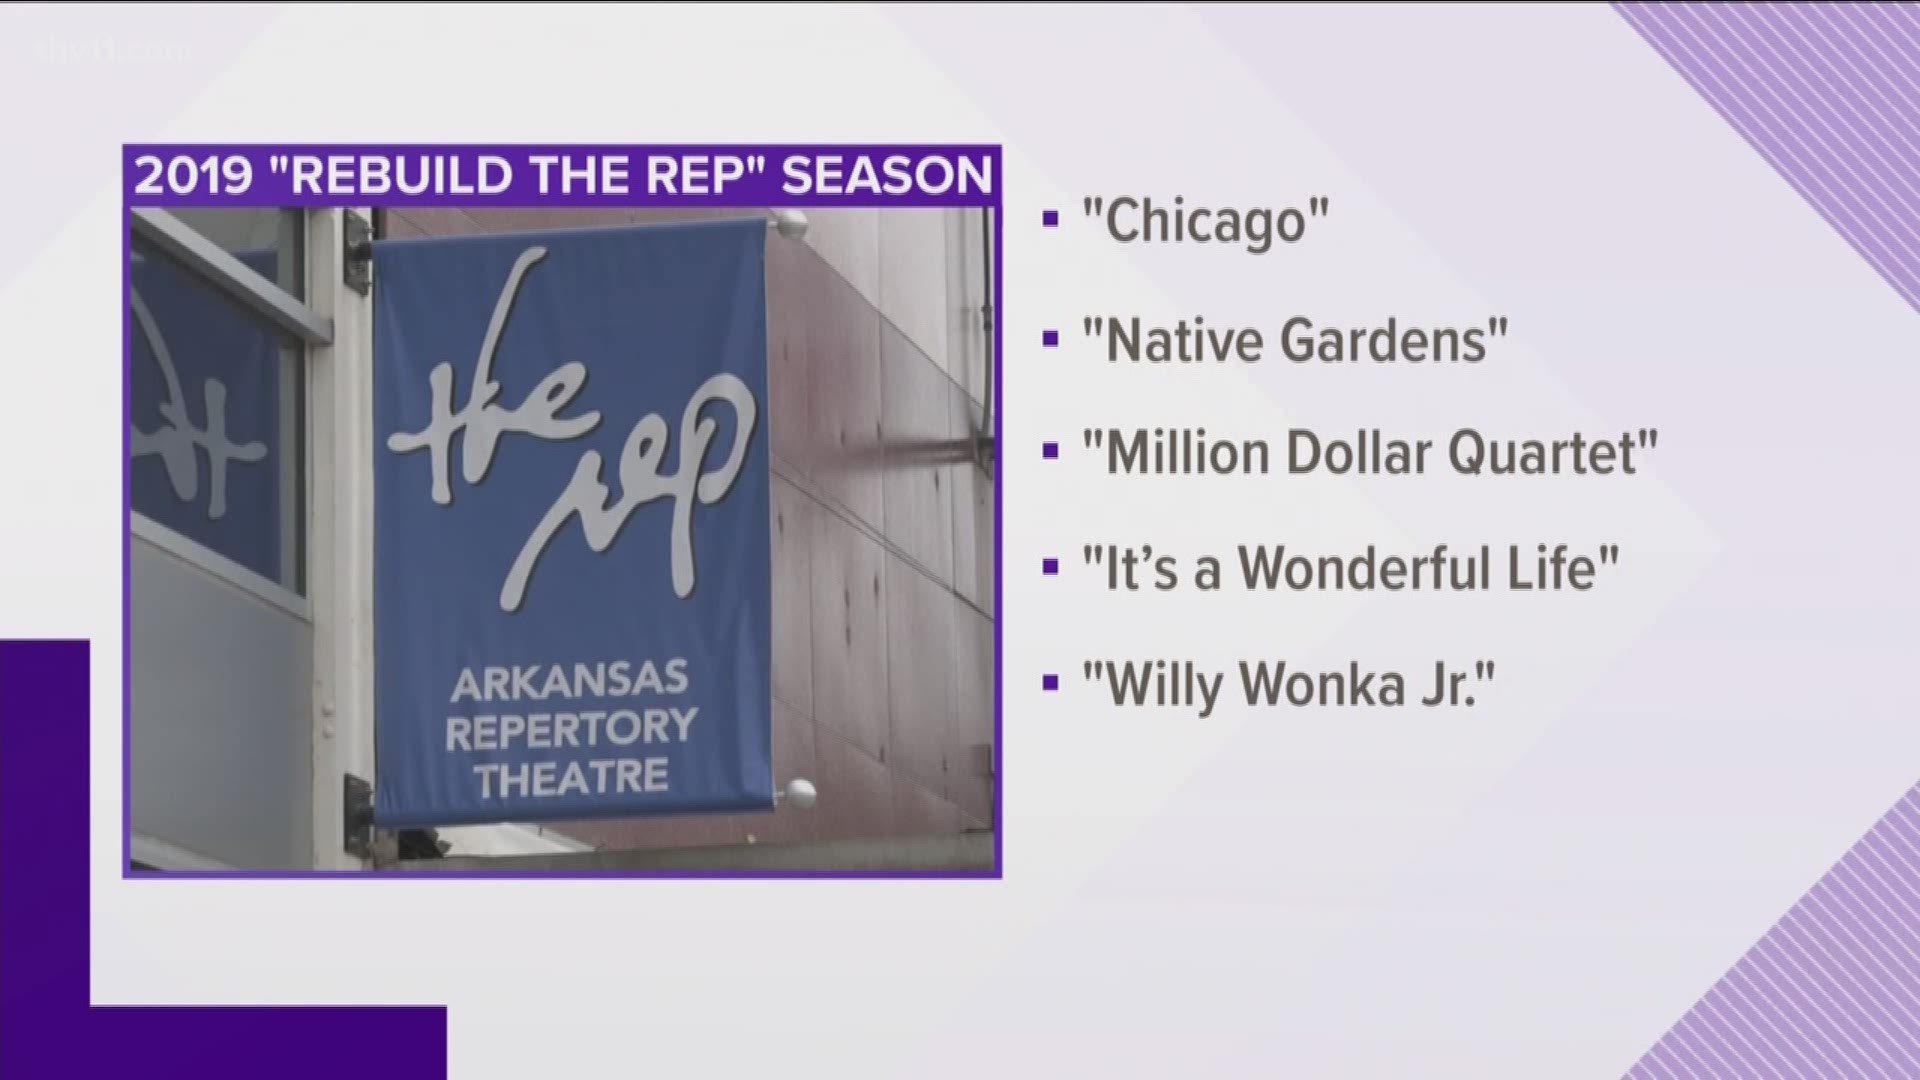 Big news, y'all! The Arkansas Repertory Theatre is announcing their new lineup. The new season marks the return of The Rep after productions were suspended in April because of funding shortages.